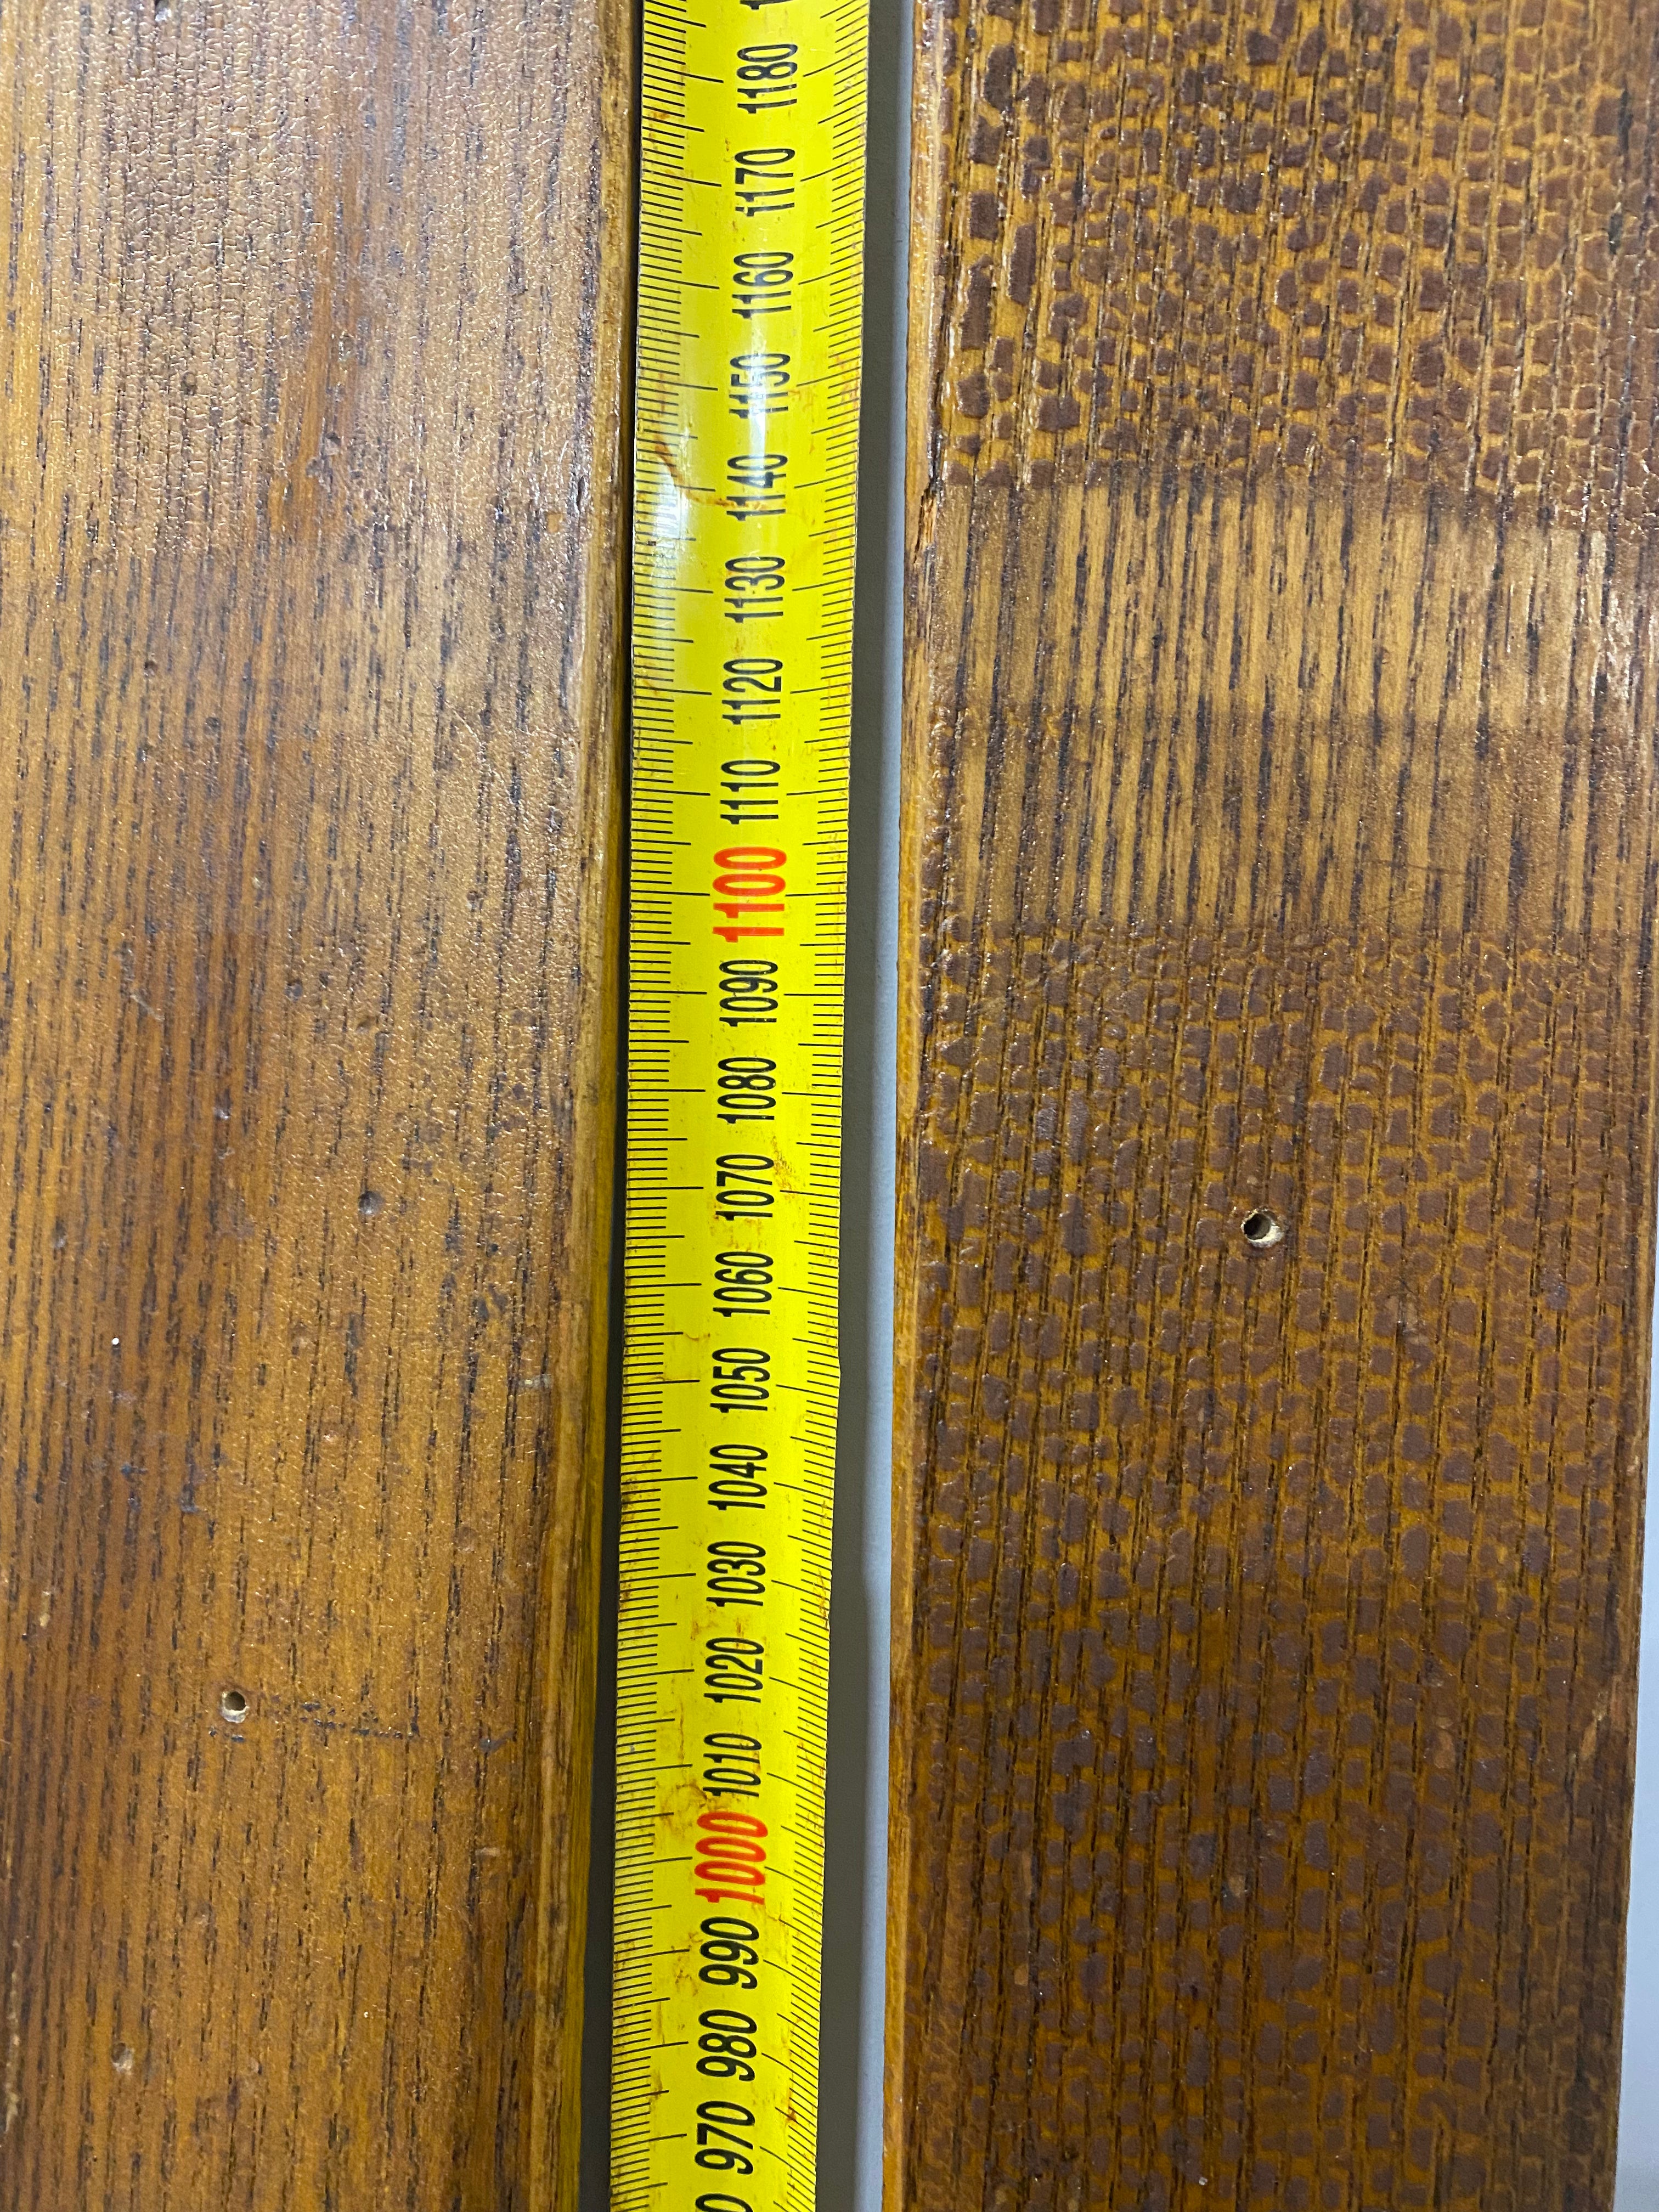 Close up of middle of skis. Unbranded vintage wooden skis, showing small drilled holes. leaning against white painted wall with yellow measuring tape.